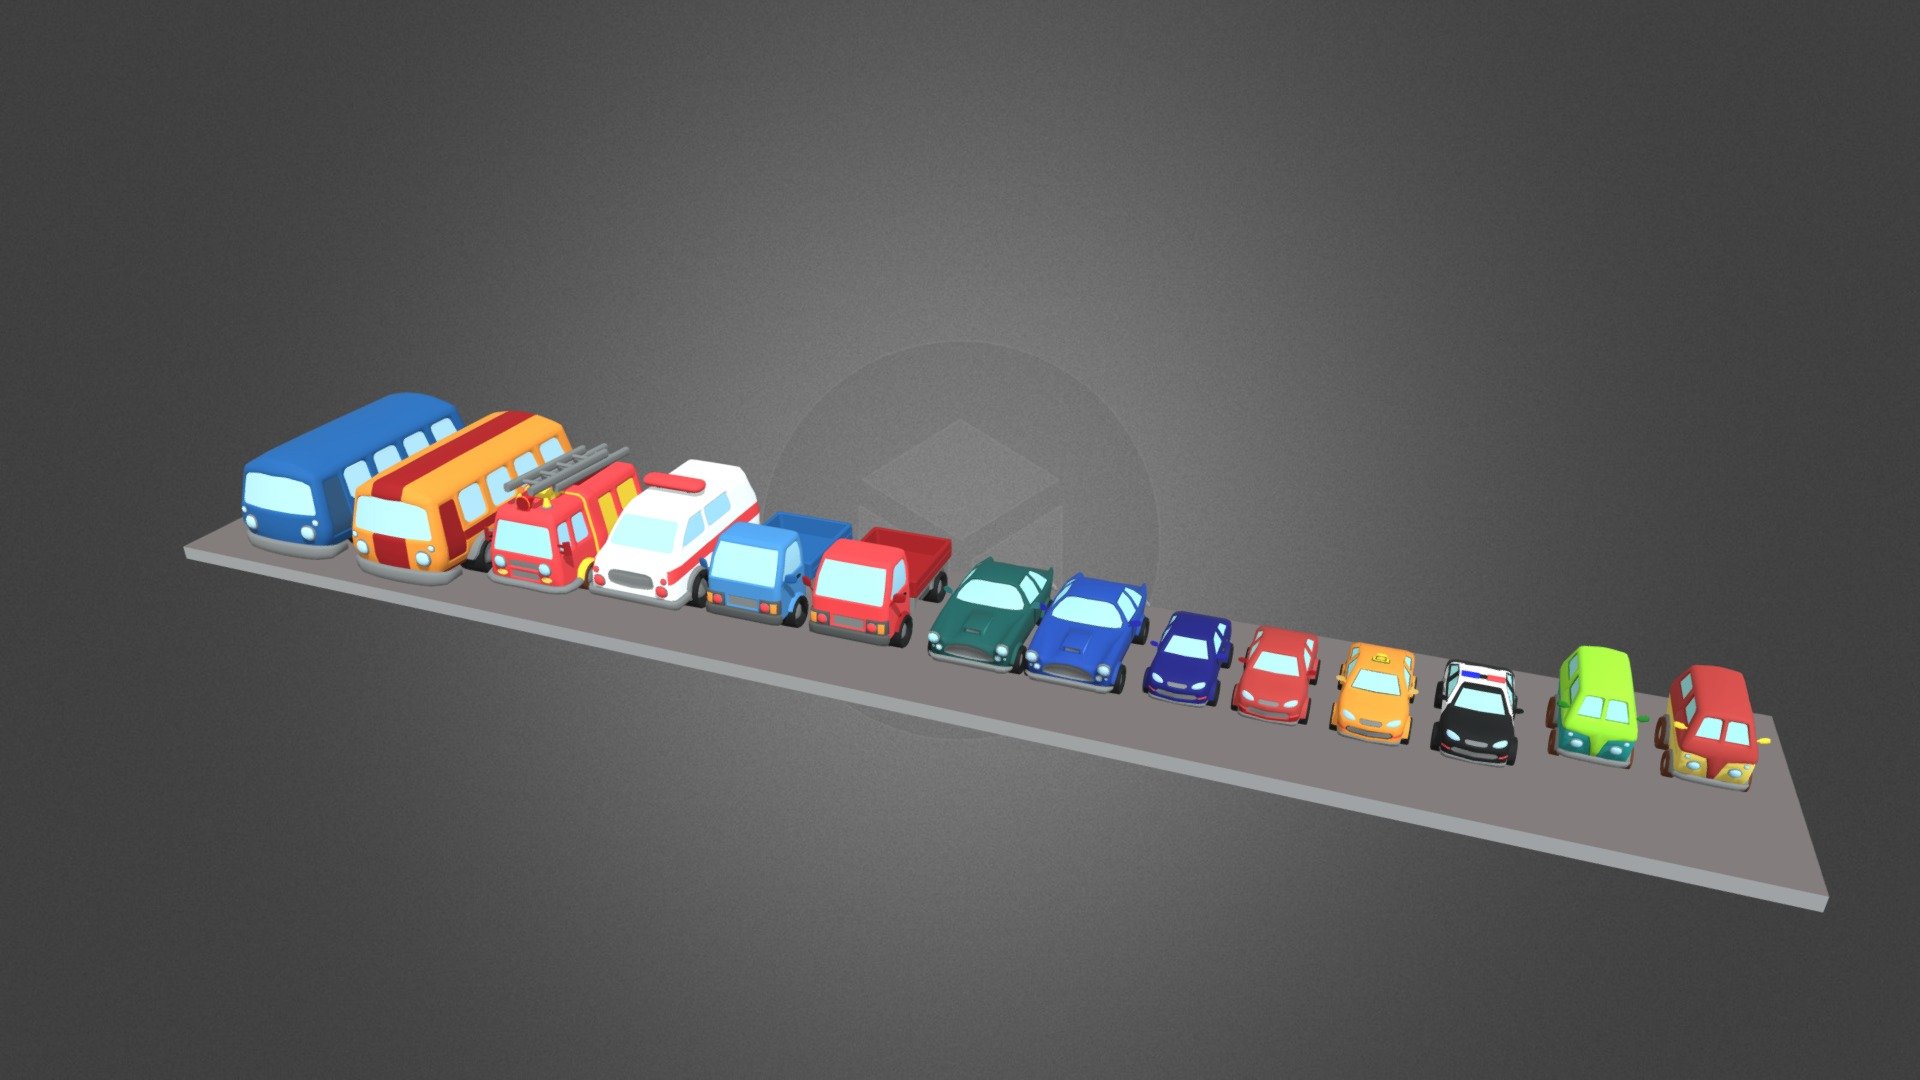 Looking for a way to add some excitement to your cityscape? Check out the Clay City Vehicle Pack!

This vehicle pack is just what you need! With 14 different vehicles, including a sedan, ambulance, police car, taxi, and more, you can create all sorts of scenarios. Have a traffic jam on the highway, or a high-speed chase through the city streets – the possibilities are endless!

This Vehicle Pack includes:

1 Ambulance 🚑
1 Fire Truck 🚒
1 Police Car 🚓
1 Taxi 🚕
2 Buses 🚌🚌
2 Sedan 🚗🚗
2 Retro Cars 🚘🚘
2 Trucks 🚚🚛
2 Vans 🚐🚐

This Clay City Vehicle Pack can be great addition to Clay City Environment Pack.

So don't wait any longer, grab the Clay City Vehicle Pack today!

We look forward to your feedback so we can create more assets for YOU! - Clay City: Stylized Vehicles Pack - Buy Royalty Free 3D model by HayqArt 3d model